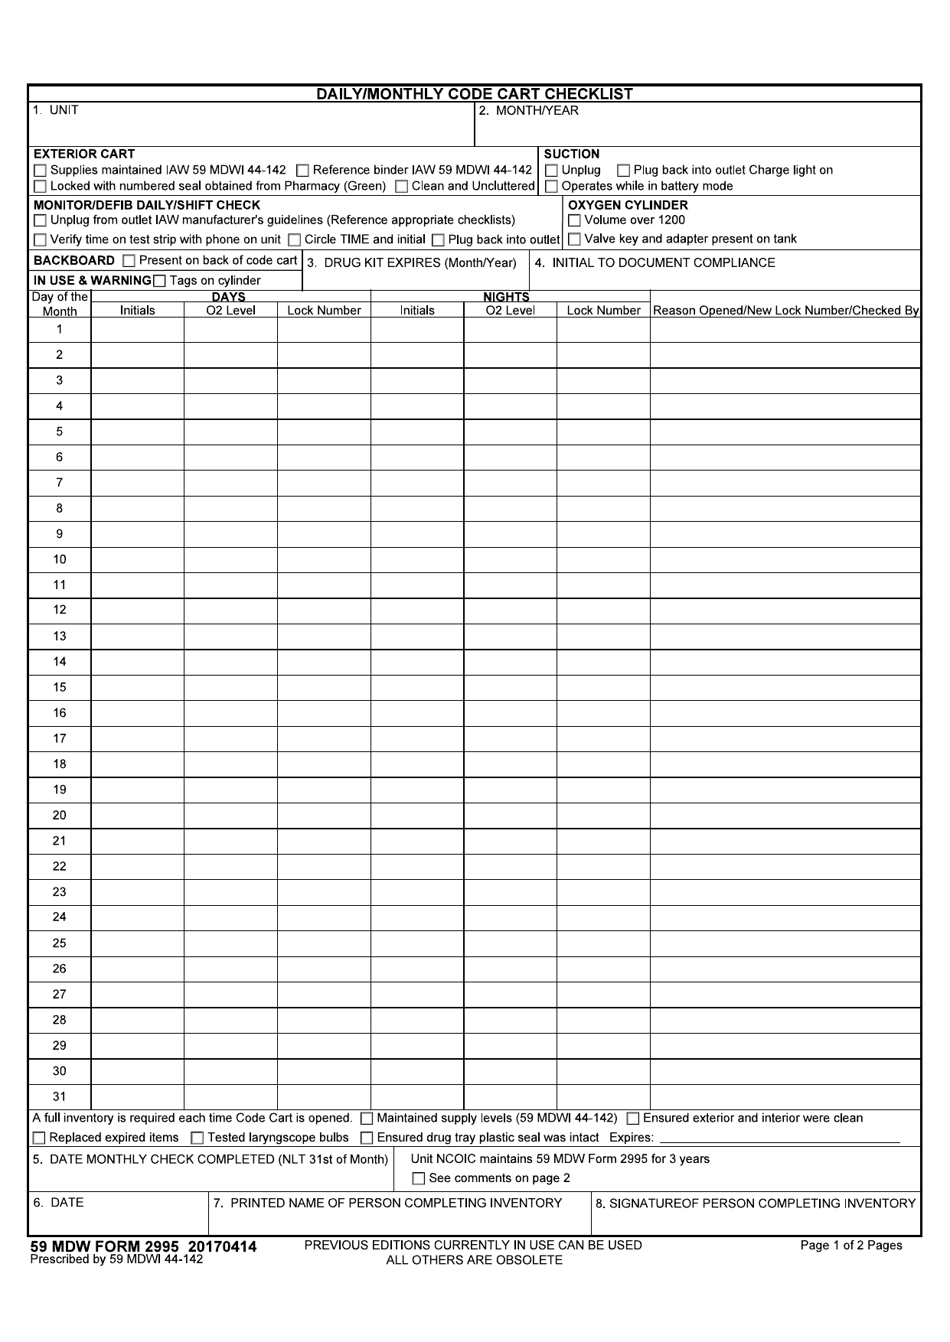 59 MDW Form 2995 Daily / Monthly Code Cart Checklist, Page 1